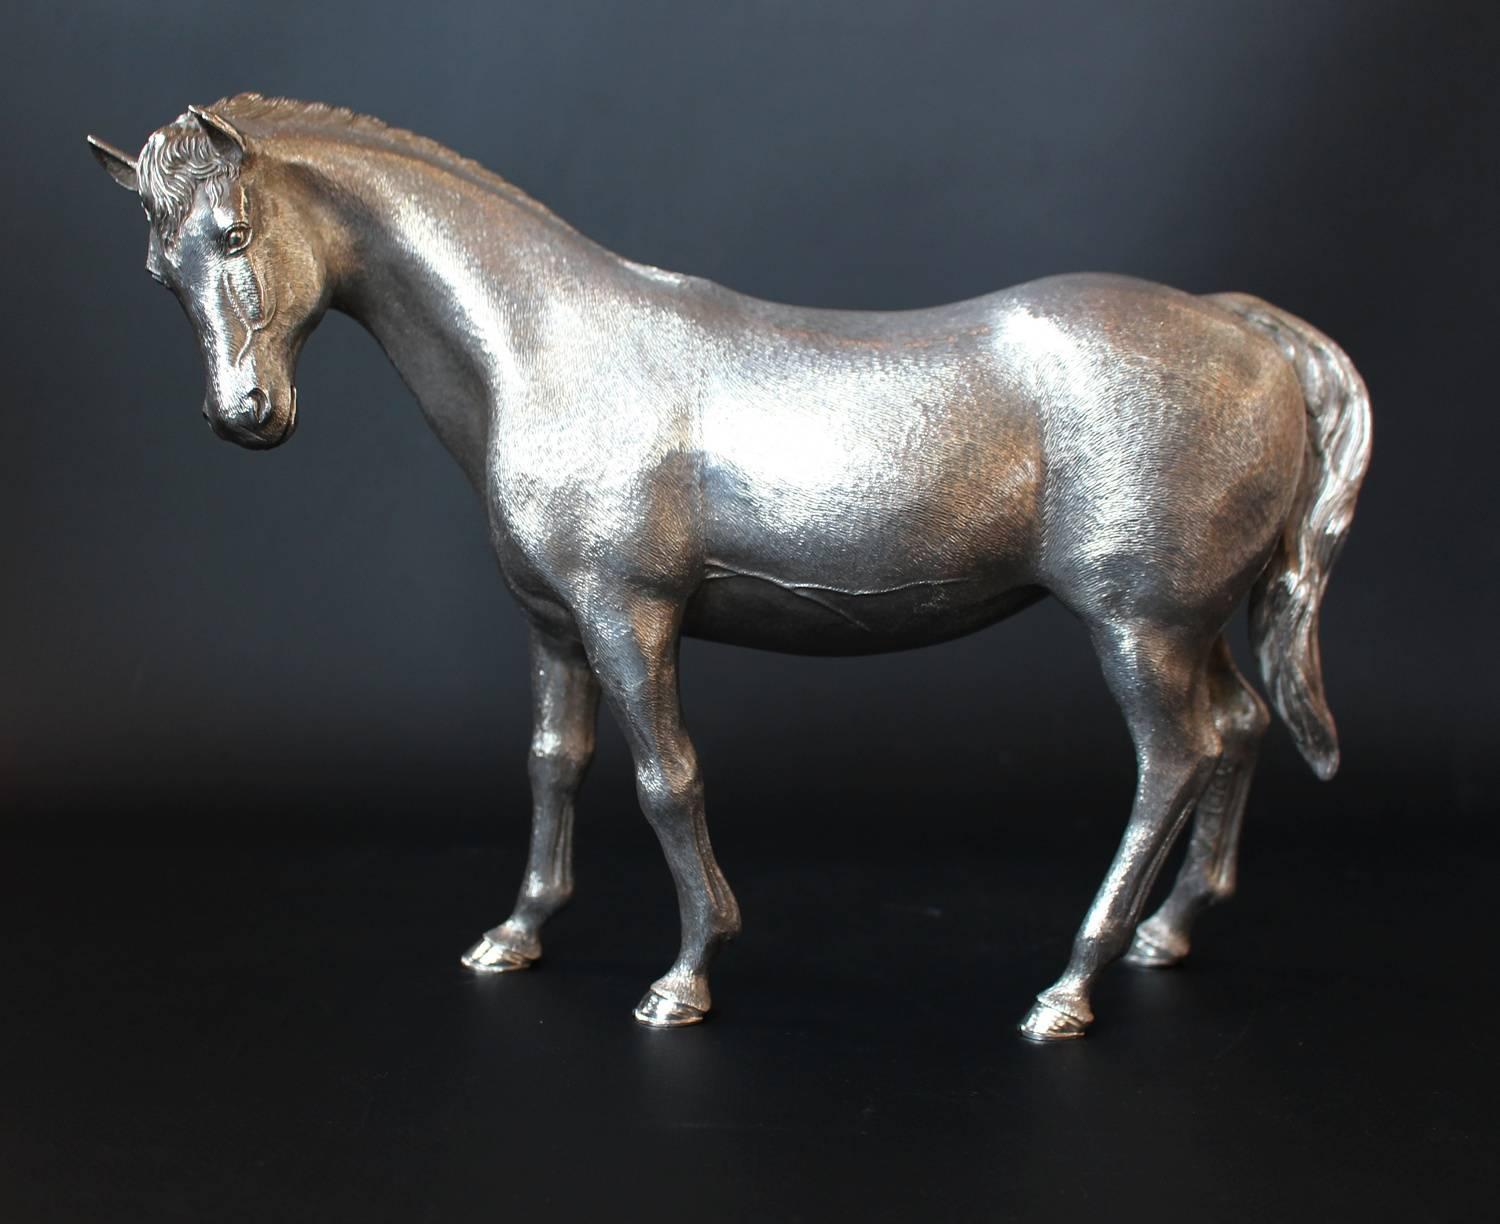 A solid silver horse by preeminent silversmith firm CJ Vander of London. a horse with flowing mane and fine detail. Stamped to inner leg with maker's mark and dated 1977.

Measures: H 20 cm, L 30 cm, D 10 cm

English, 1977.